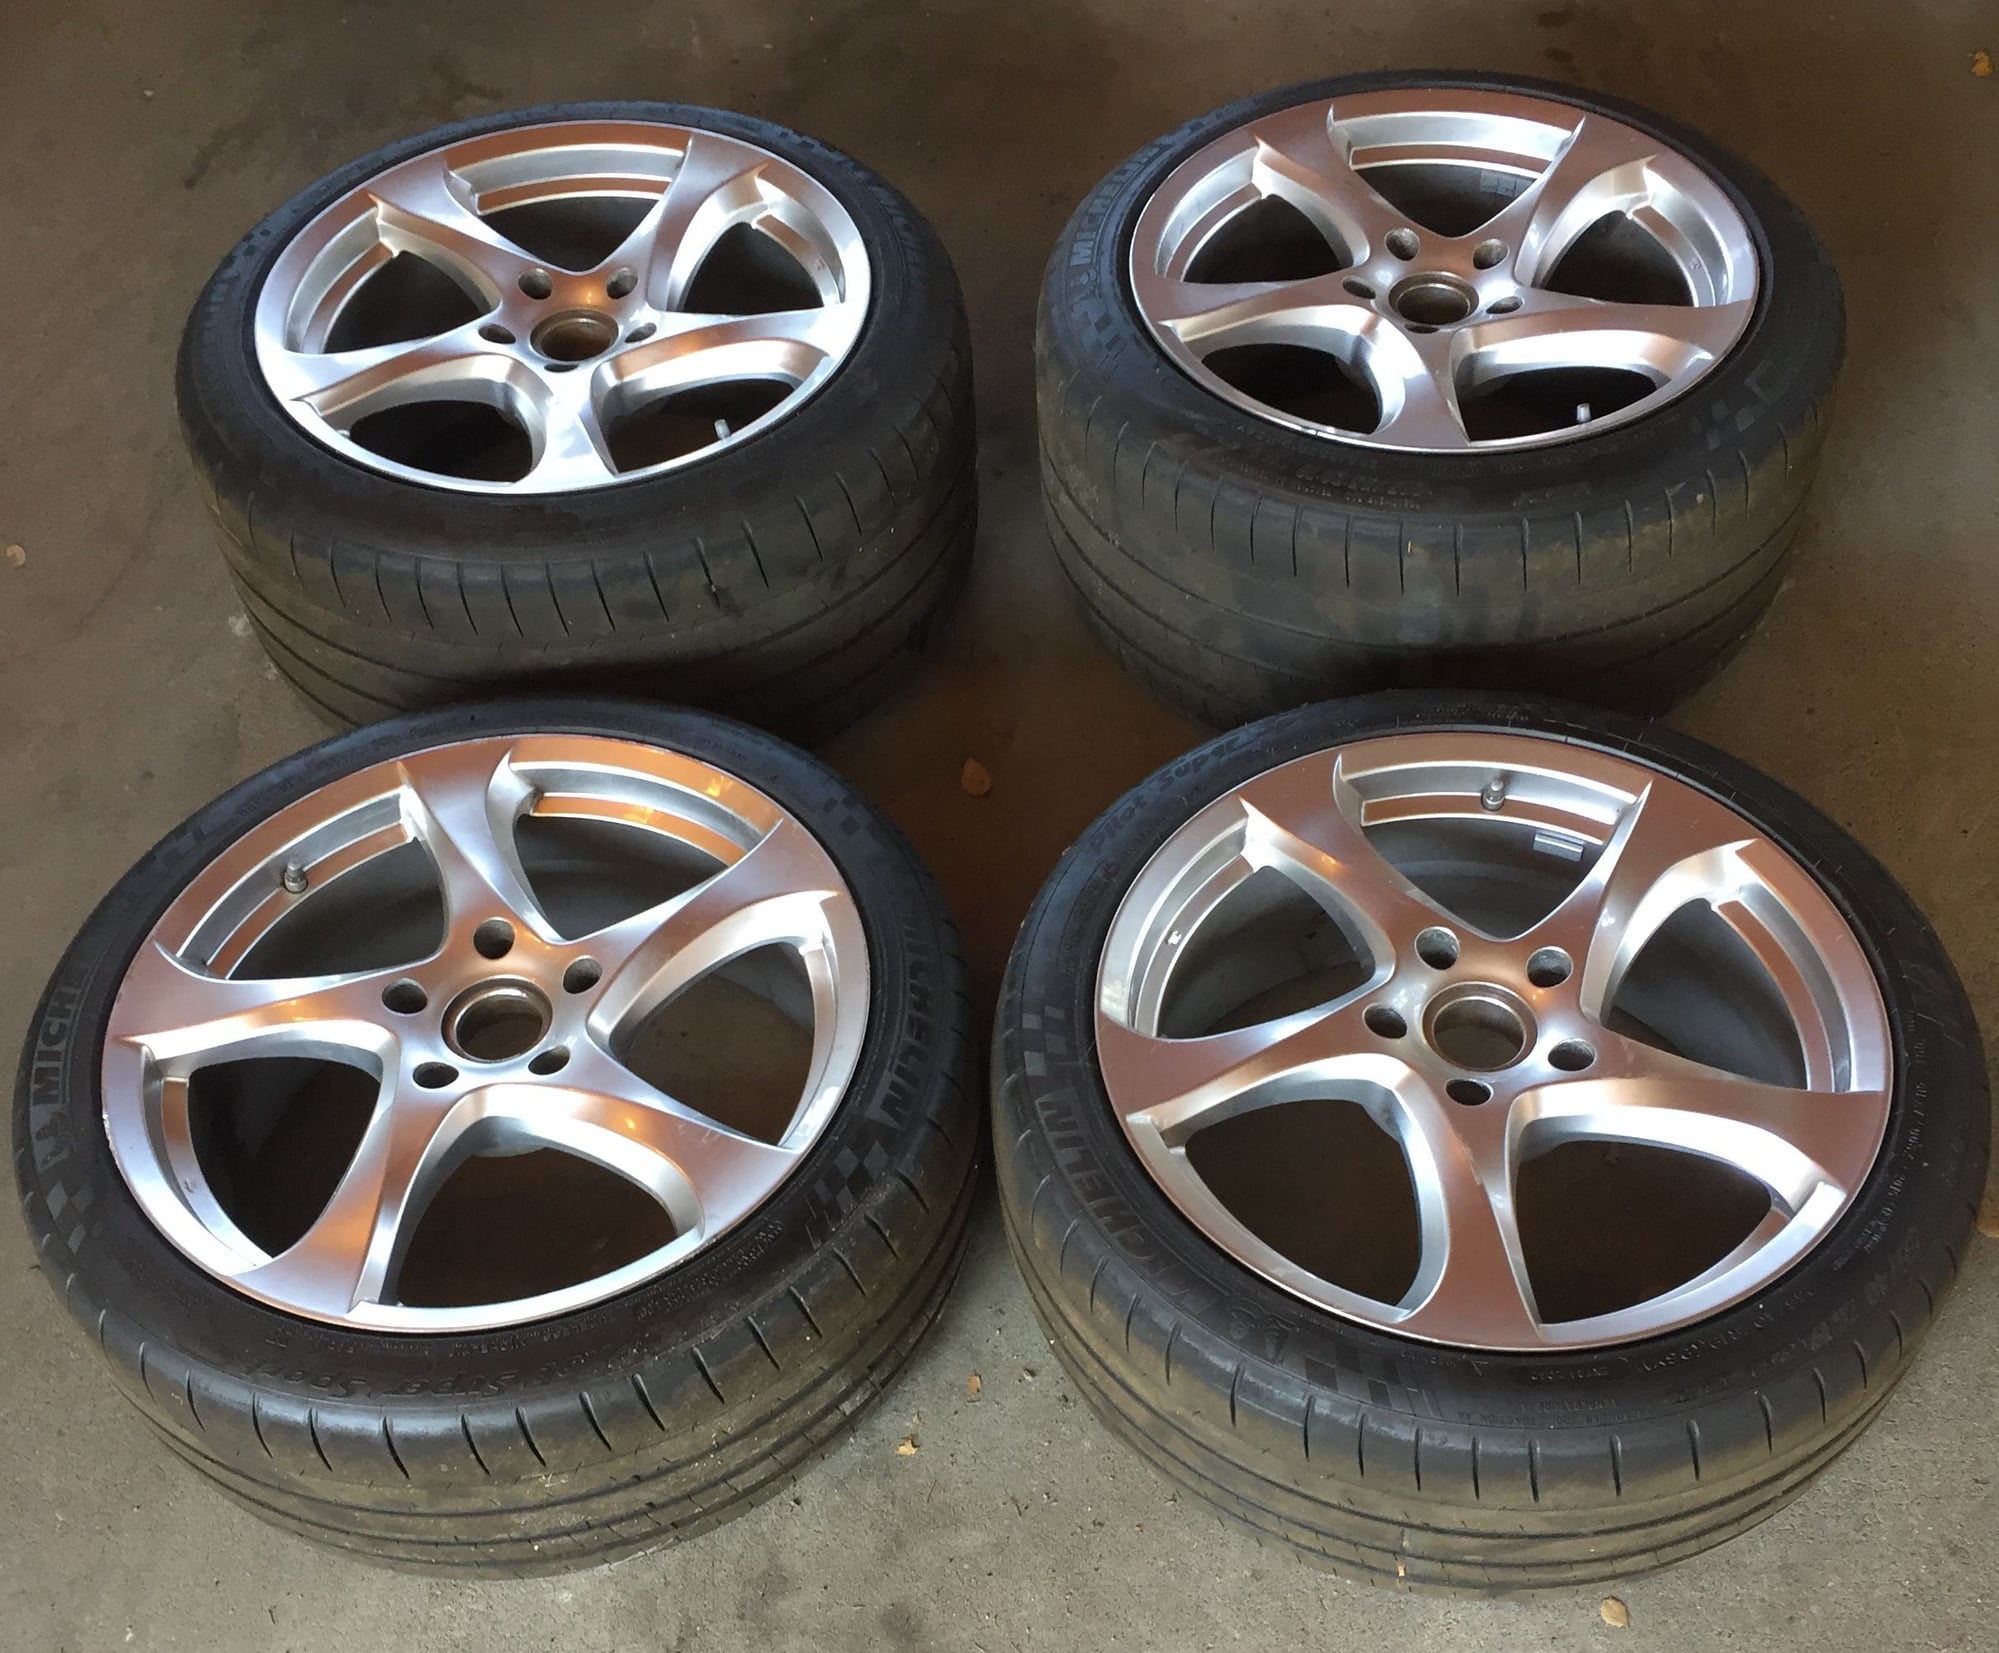 Wheels and Tires/Axles - 19" rims + Michelin Pilot Super Sport tires - Used - Berkeley, CA 94704, United States